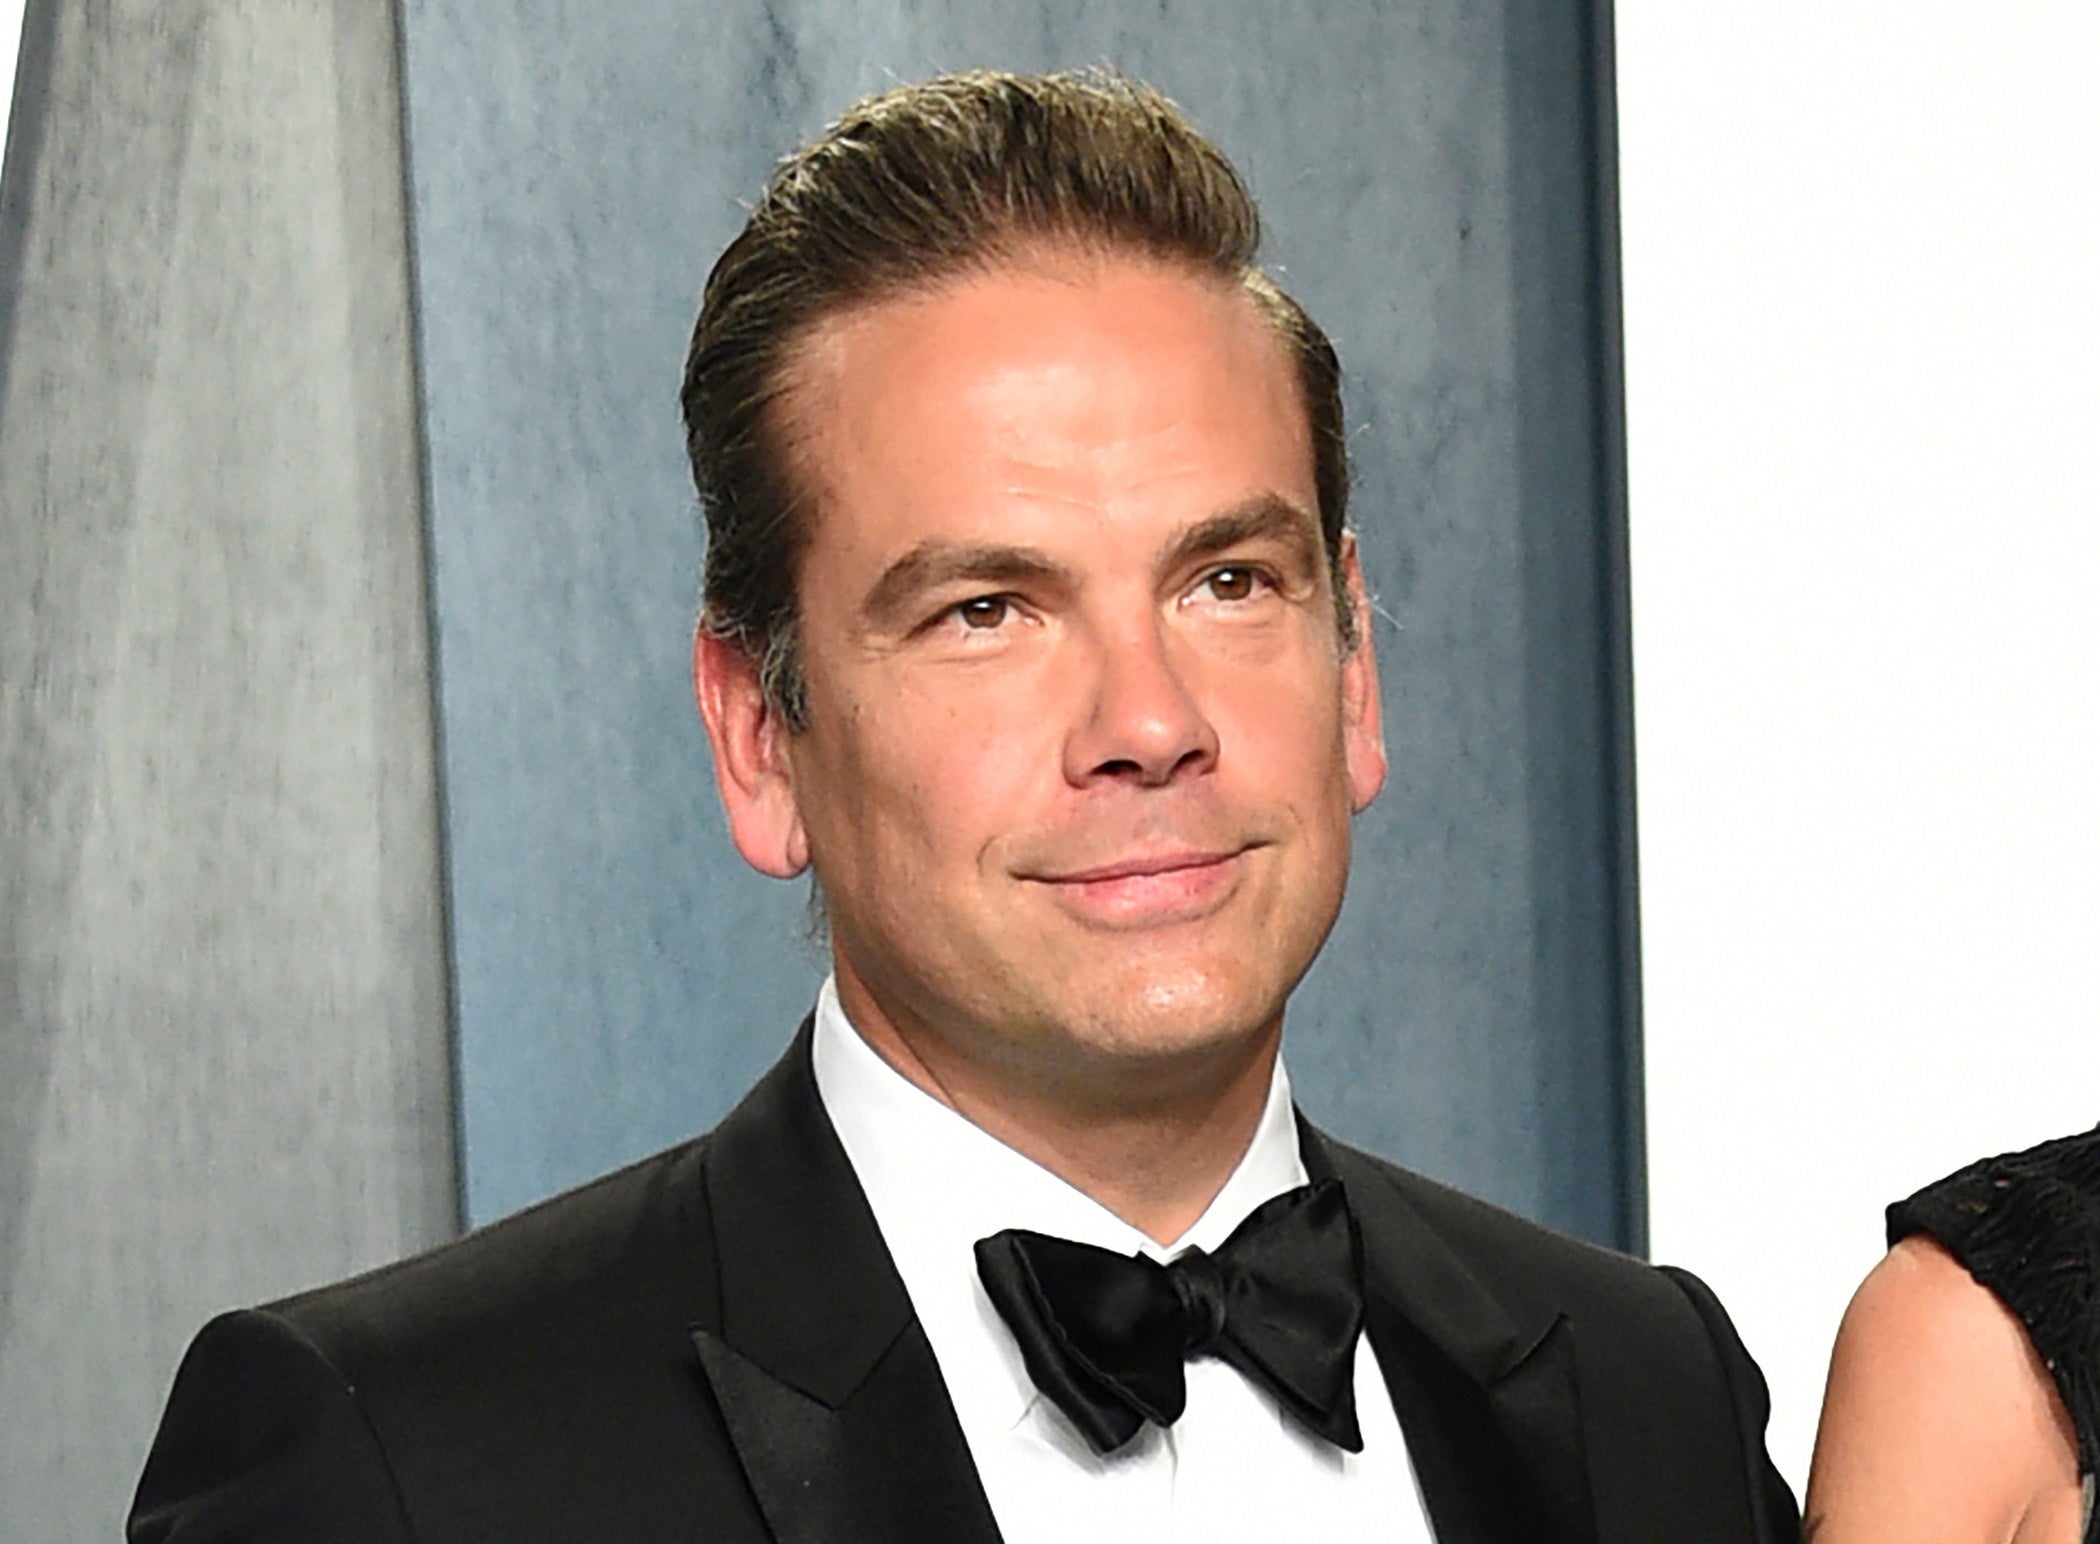 Meet Lachlan Murdoch Soon To Be The New Power Behind Fox News And The